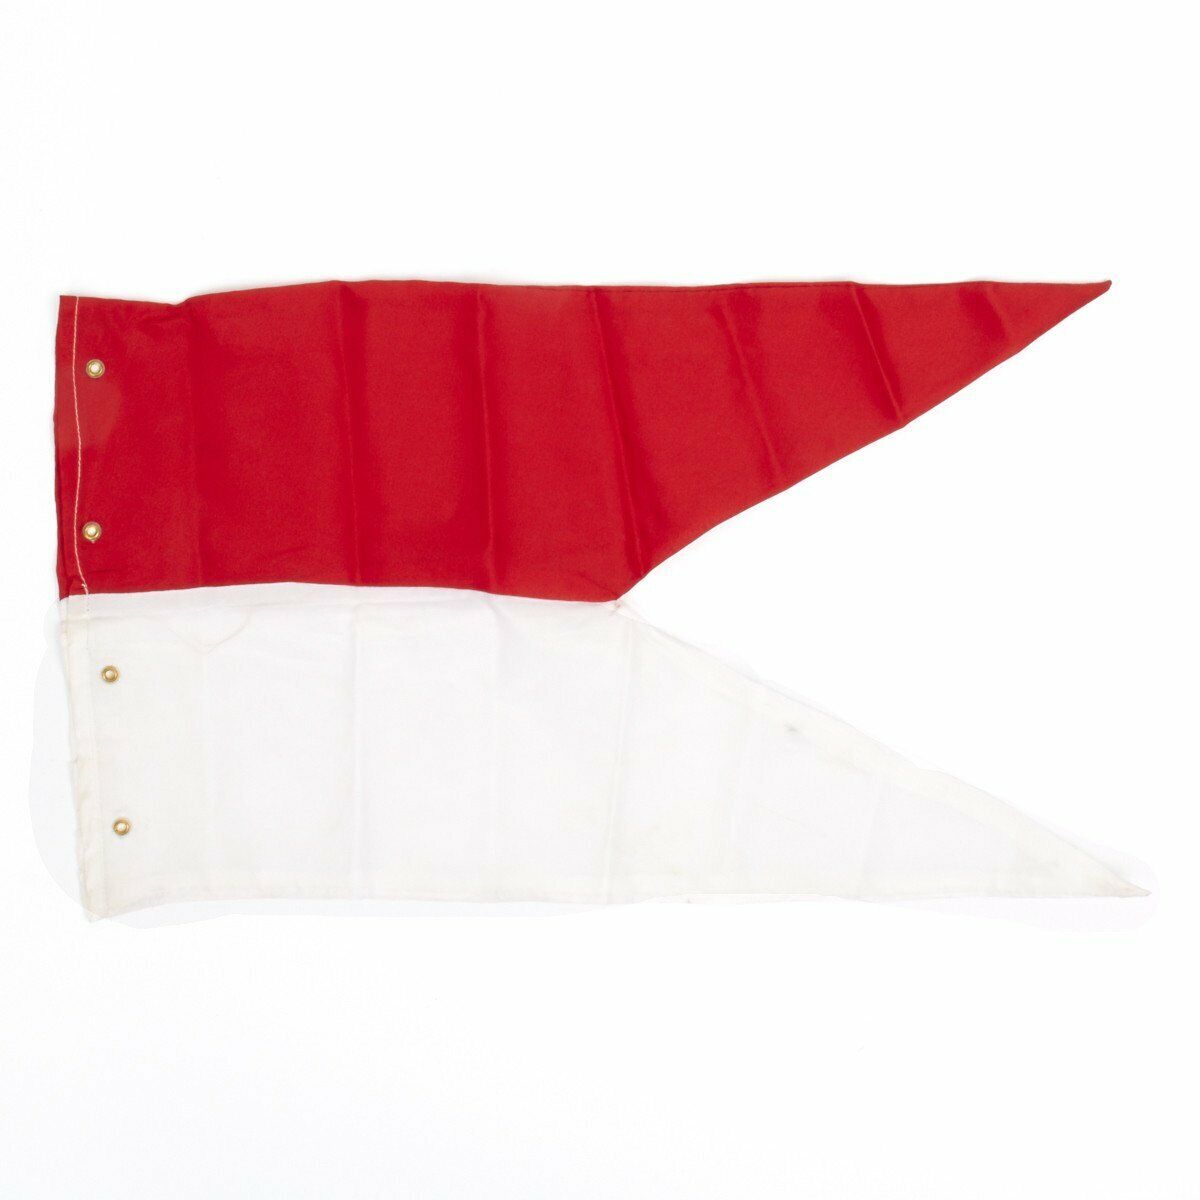 Napoleonic Wars Red and White Lance Pennant